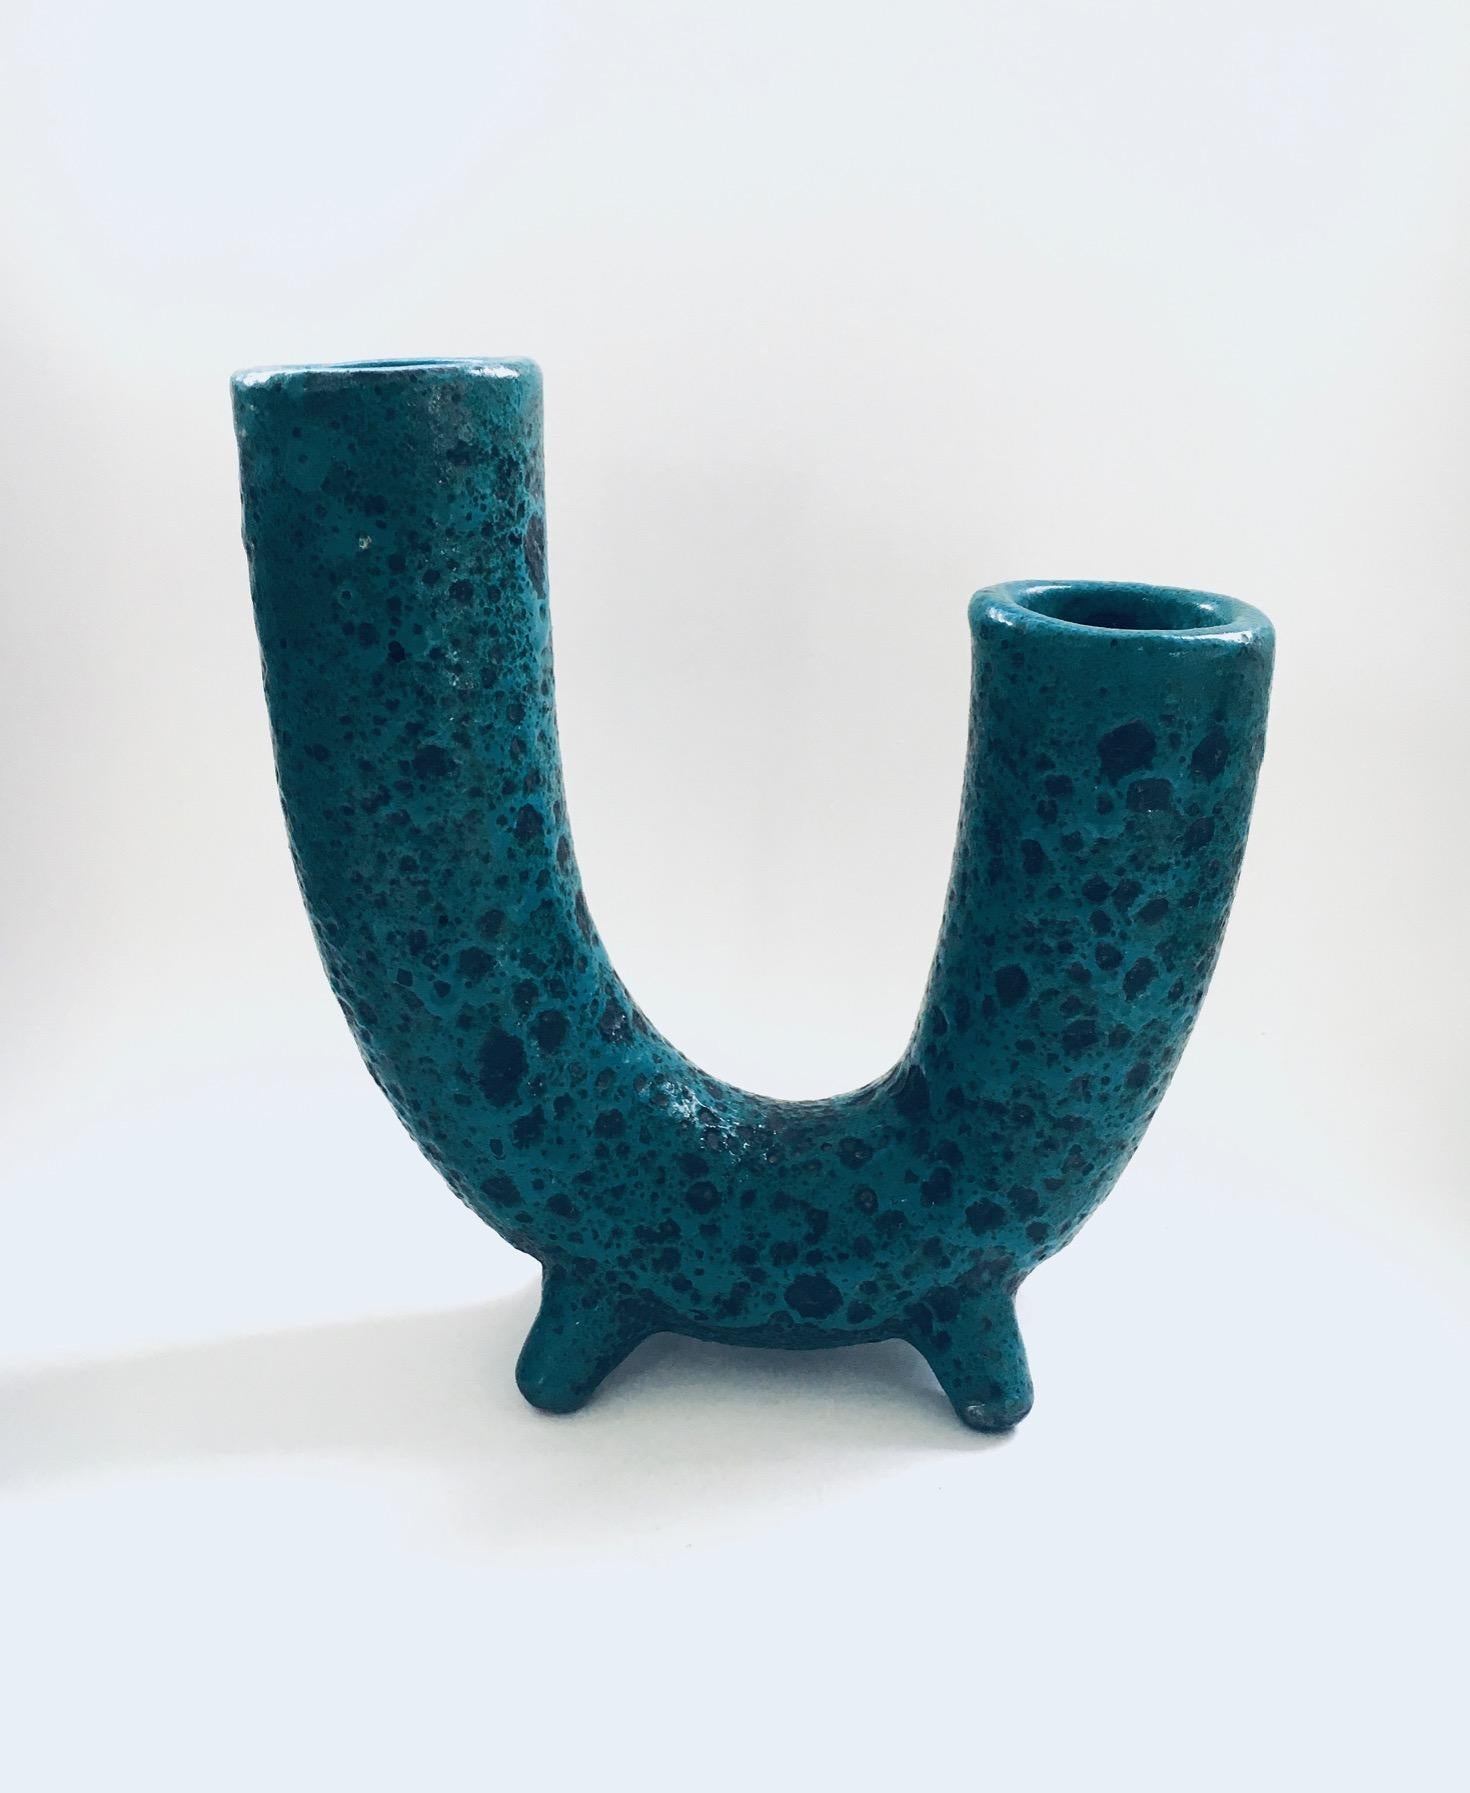 Vintage Midcentury Brutalist in Design Art Pottery Studio Horn Spout model Fat Lava Vase. Made in Belgium, 1960's period. Turquoise blue fat lava glaze over black mat glaze. No markings. Cool shape, in very good condition. Measures 29cm x 26cm x